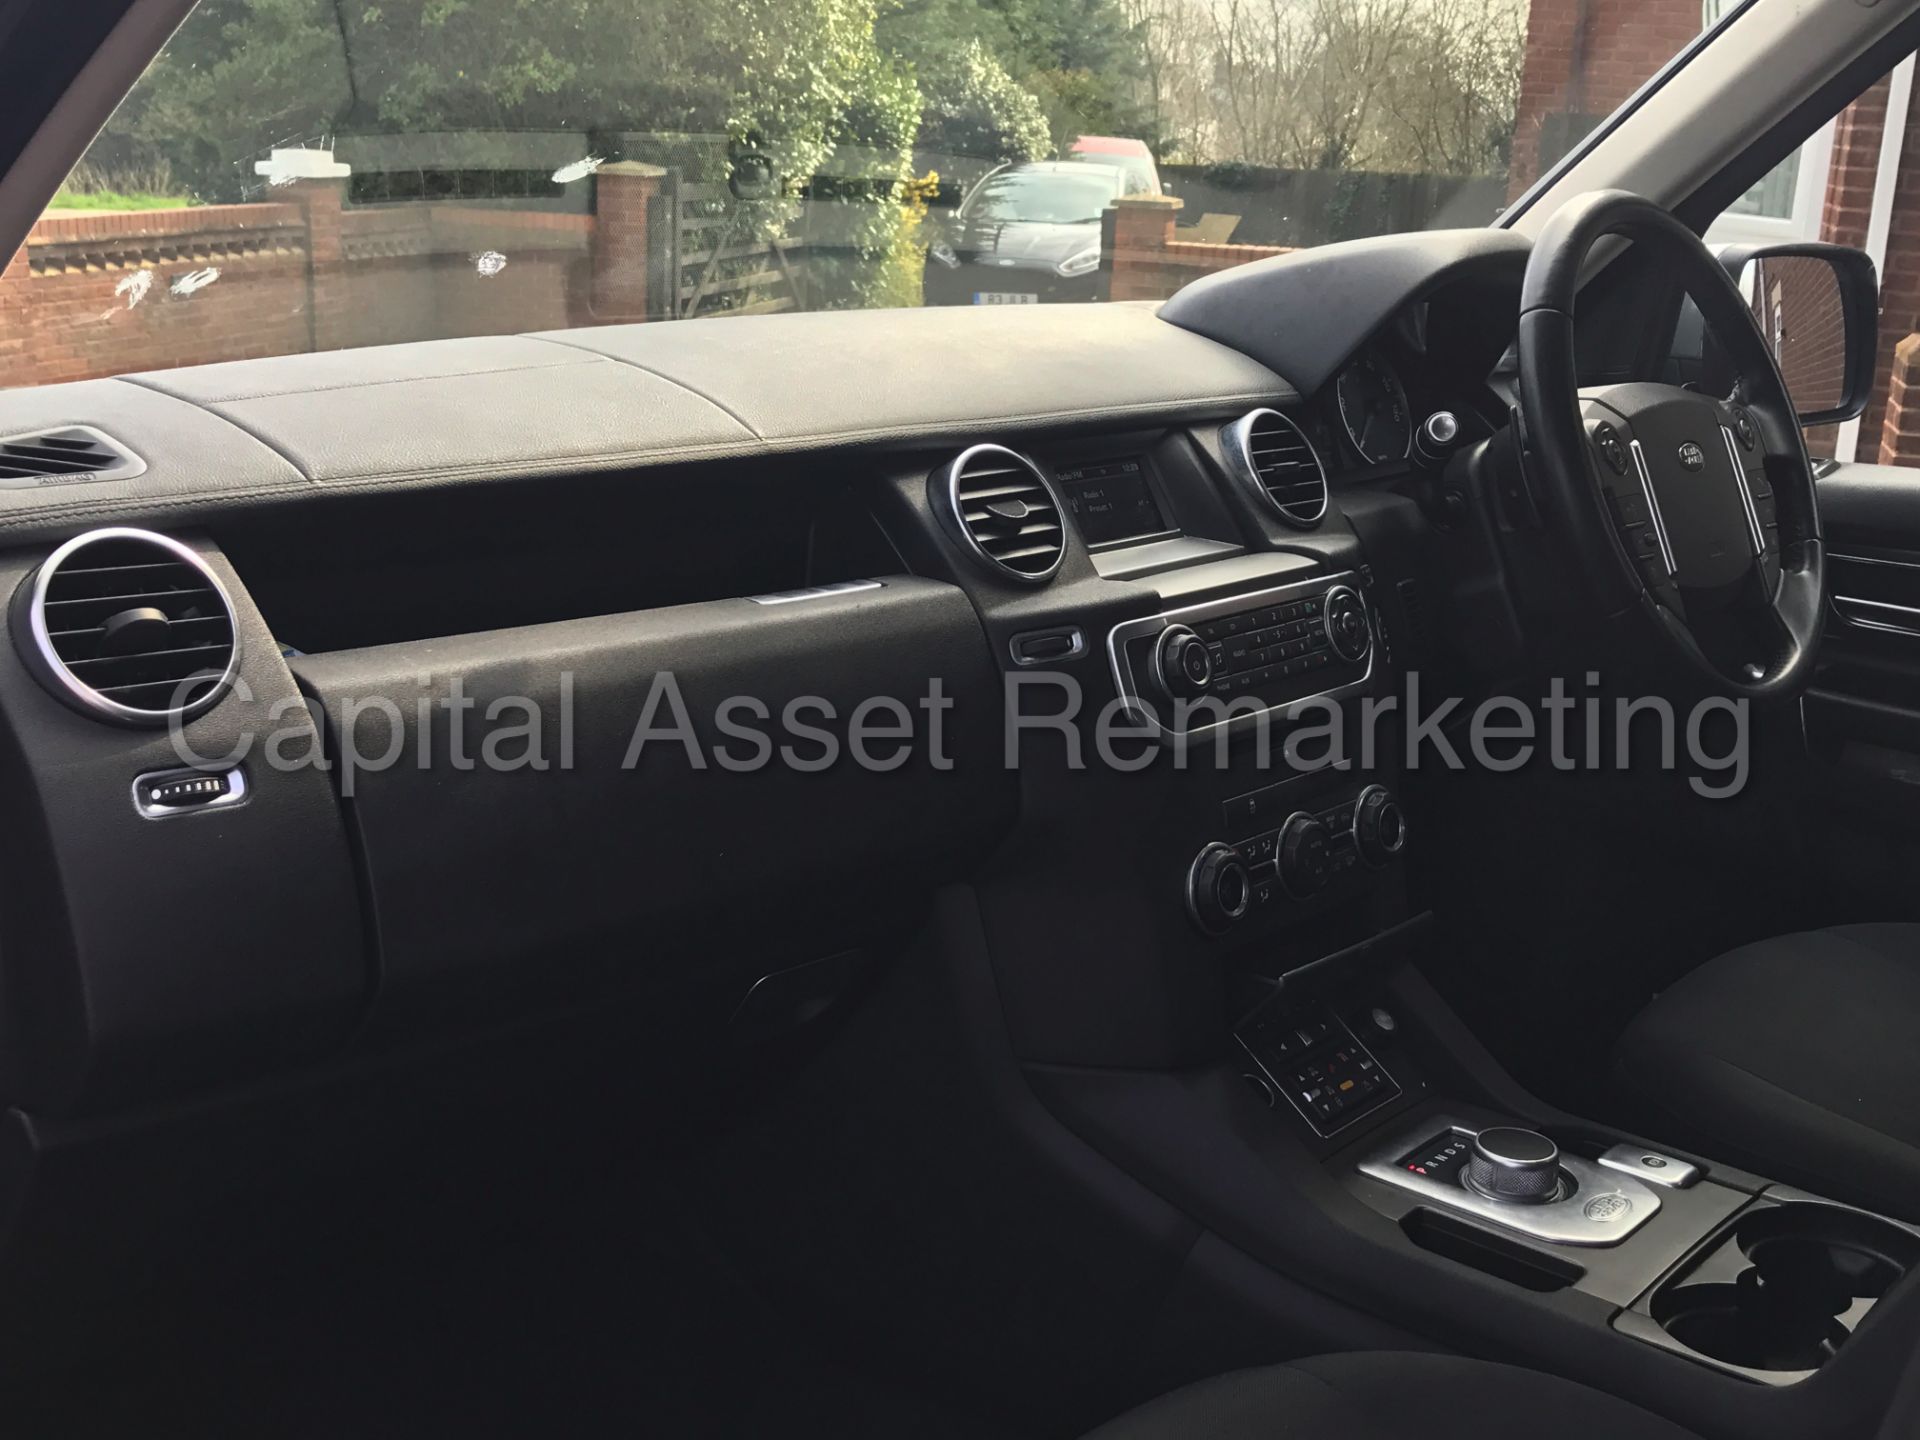 LAND ROVER DISCOVERY 4 (2014 MODEL) '3.0 SDV6 - 8 SPEED AUTO - 7 SEATER' **HUGE SPEC** (1 OWNER) - Image 21 of 30